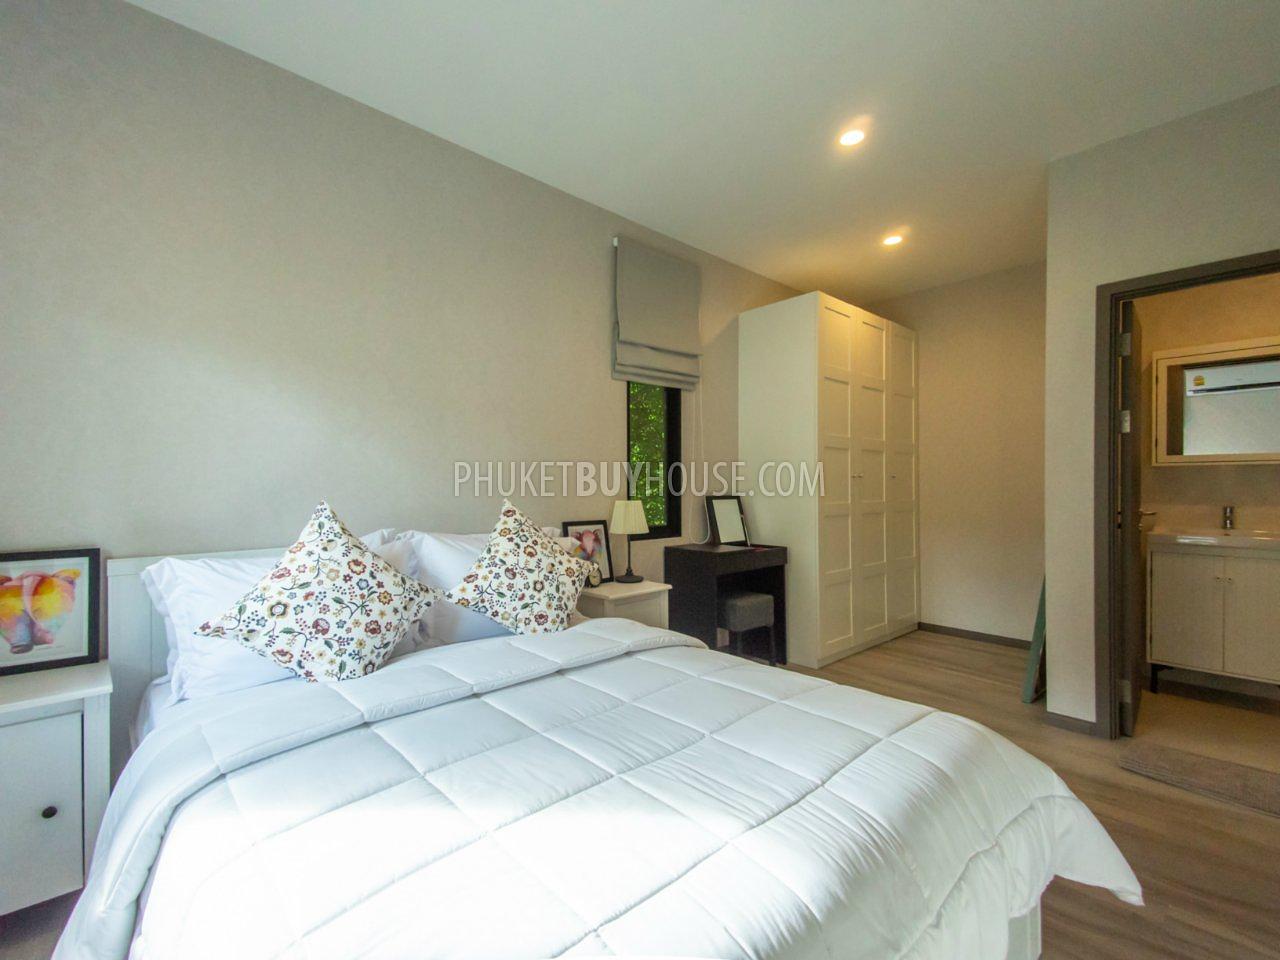 NAY6197: 1 Bedroom Apartment in a New Project within Walking Distance to Nai Yang Beach. Photo #5